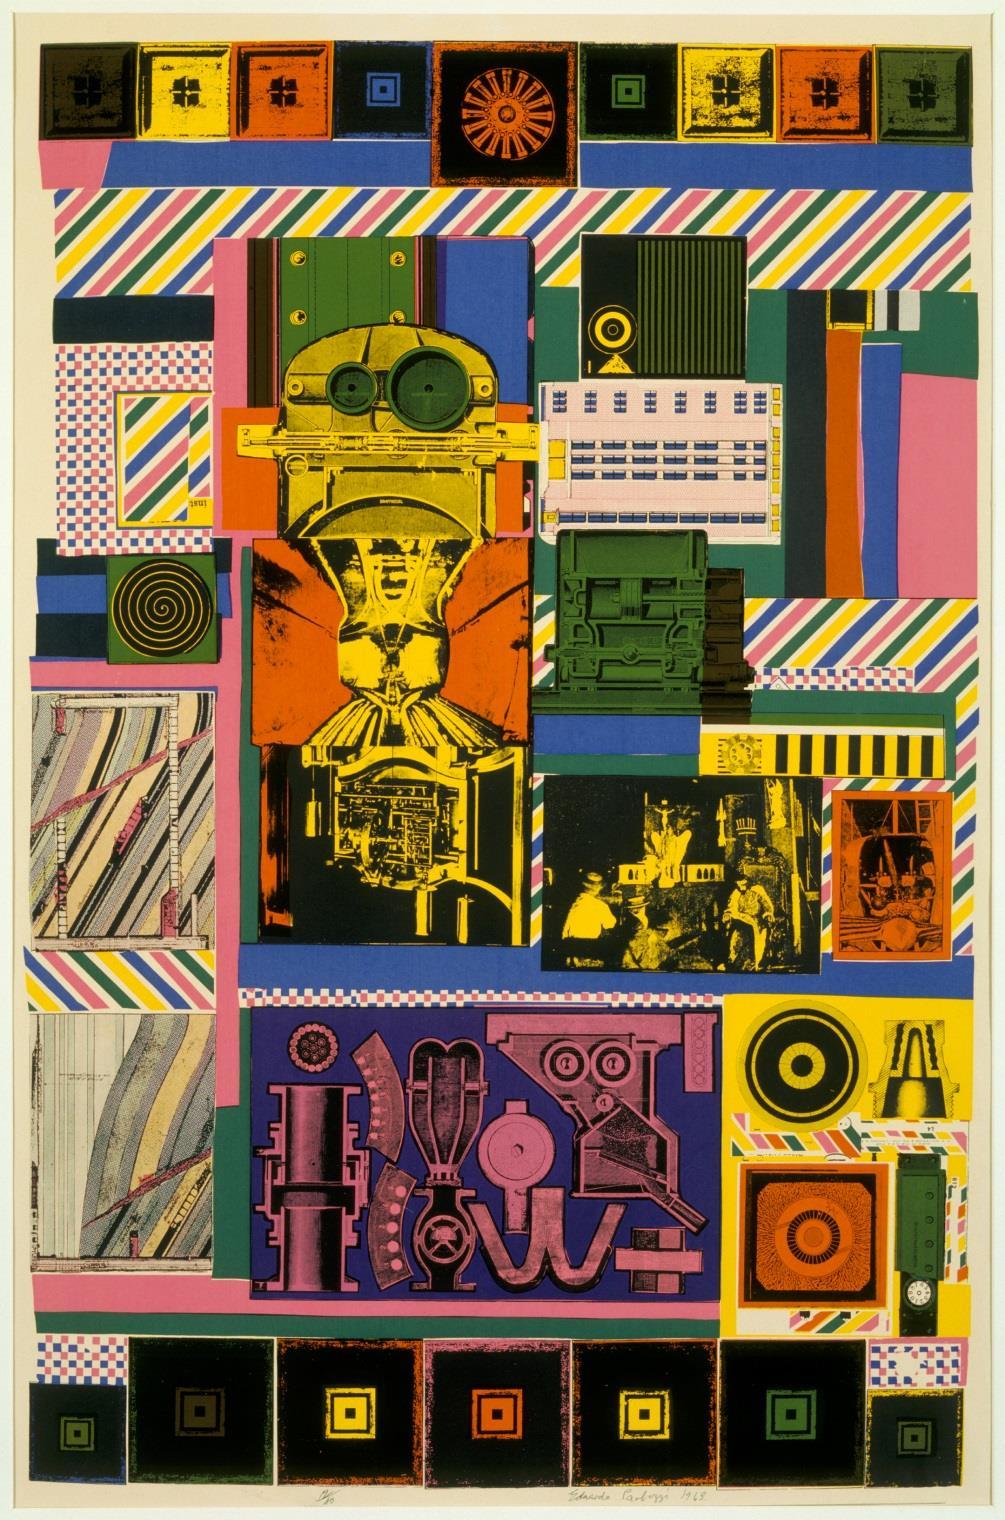 Eduardo Paolozzi (1924-2005) was one of the most innovative and irreverent artists of the 20th century.